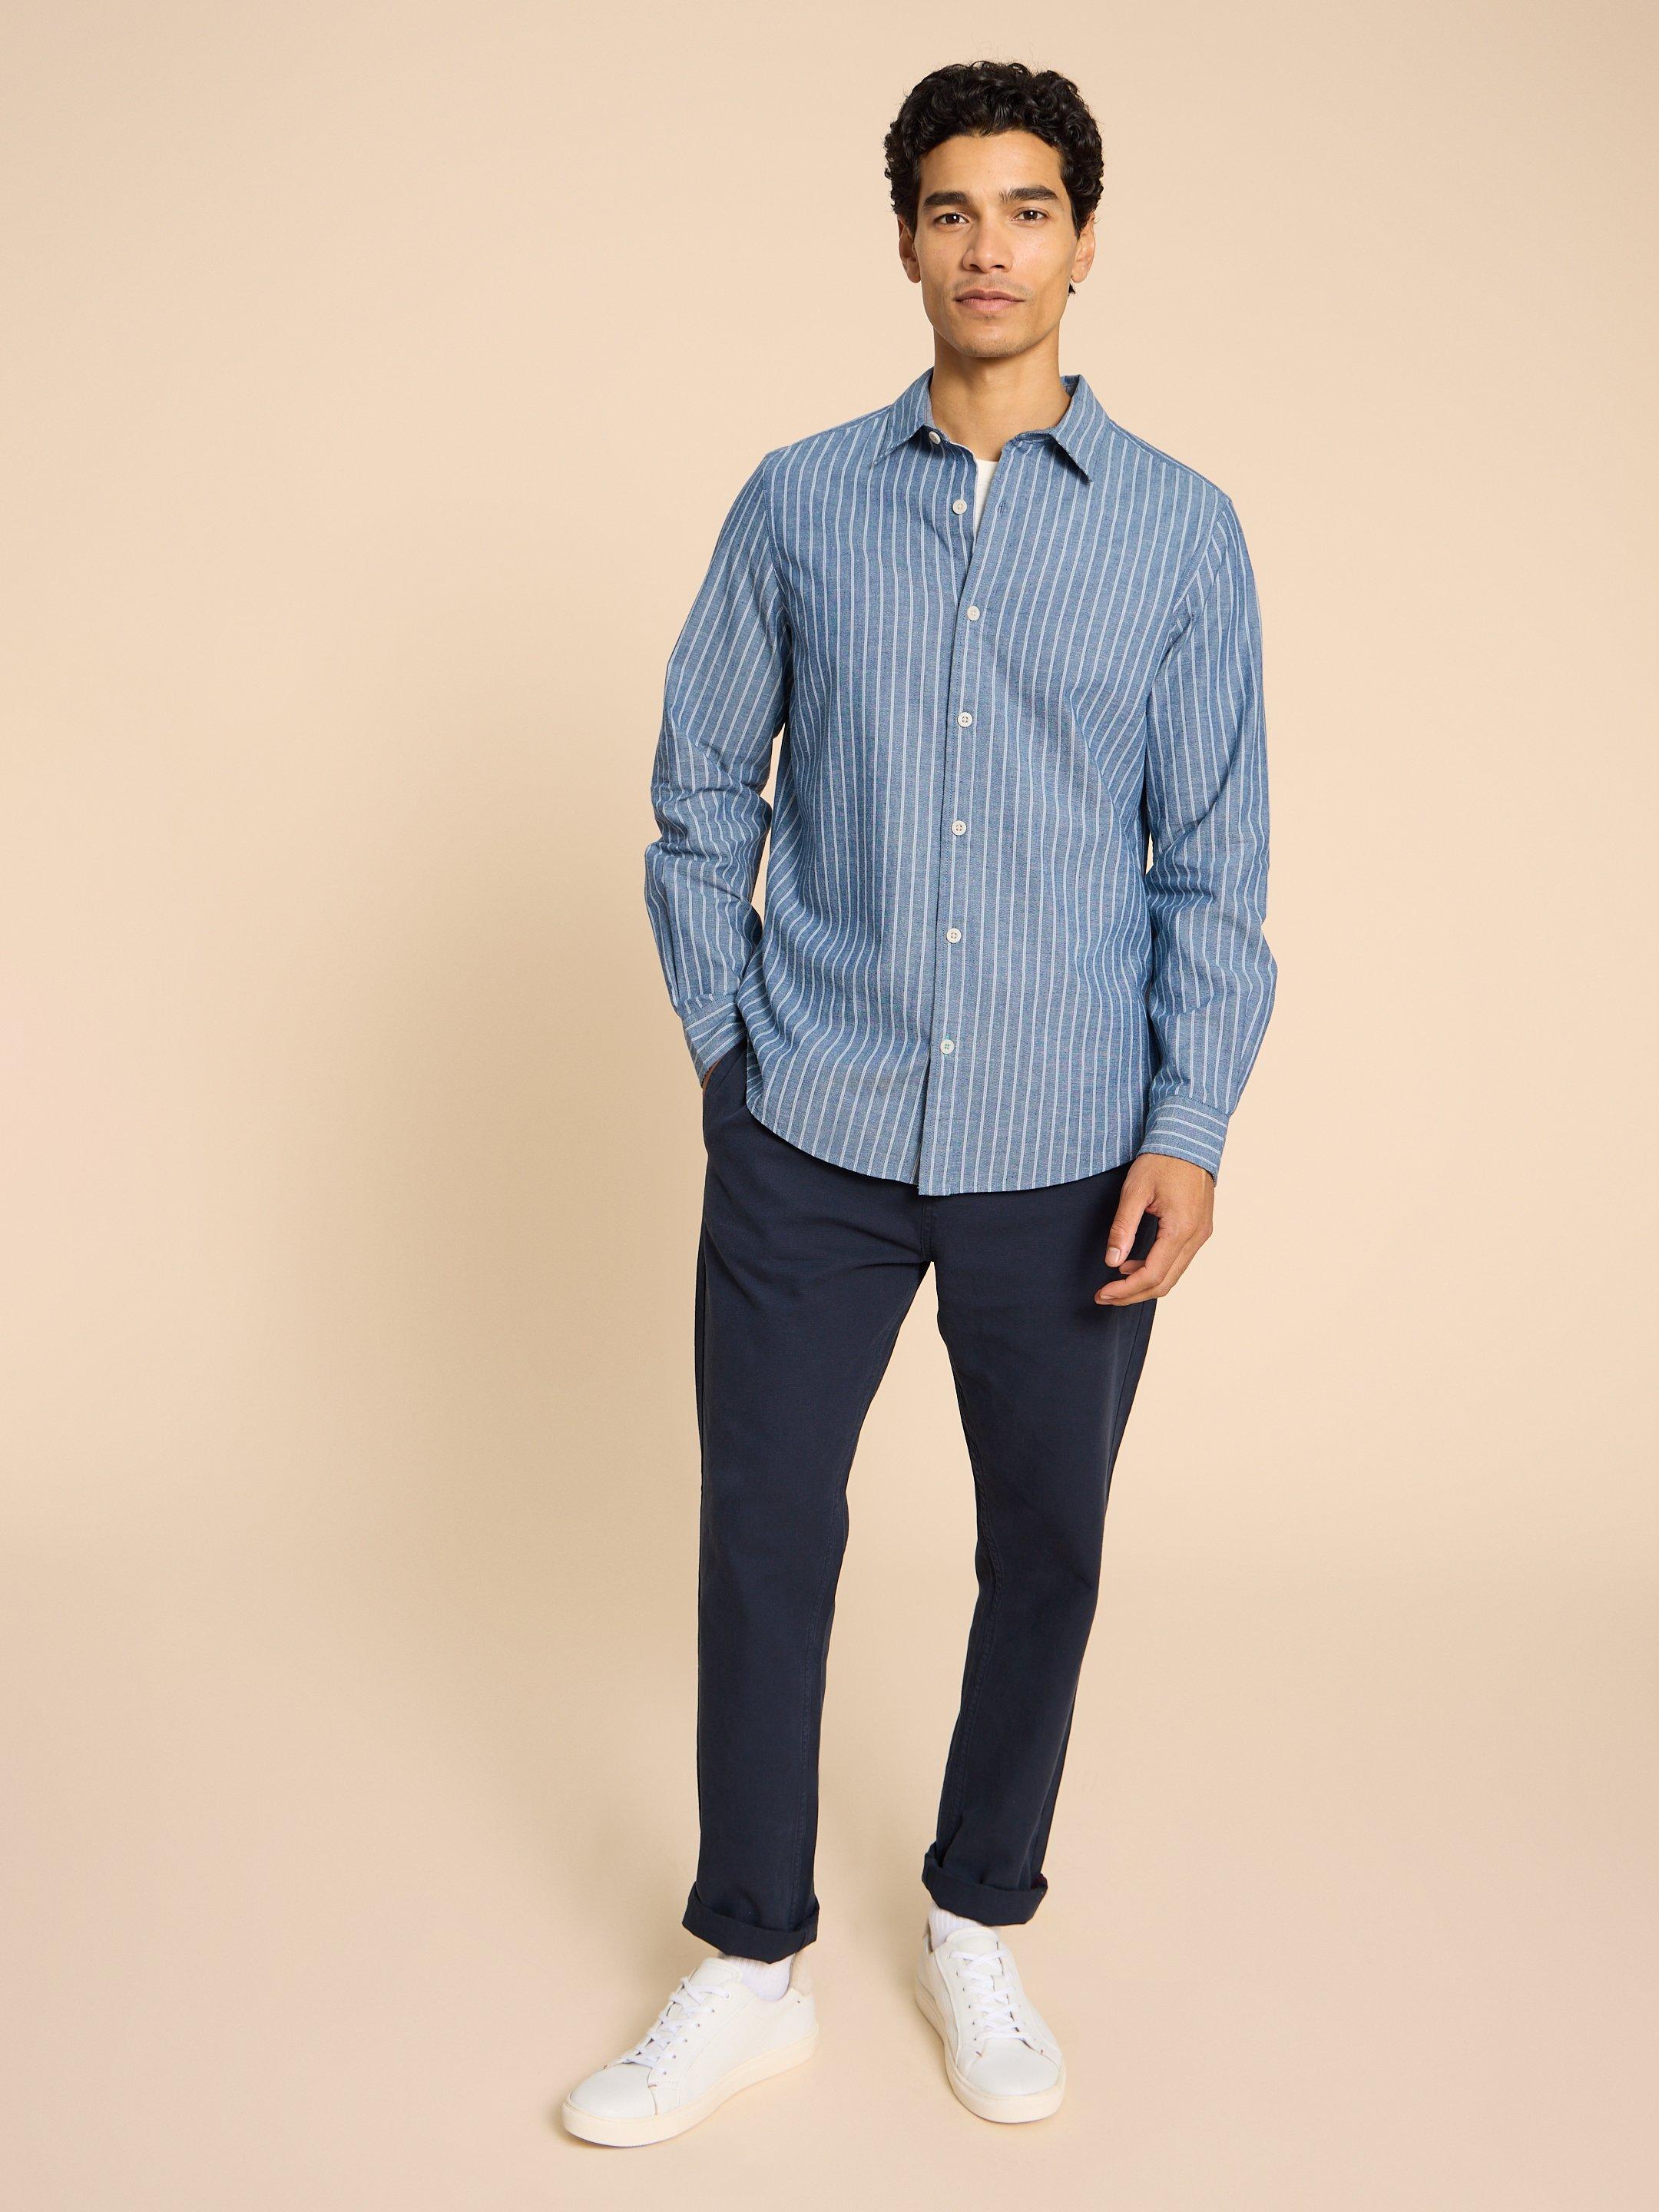 Stripe LS Shirt in CHAMB BLUE - LIFESTYLE